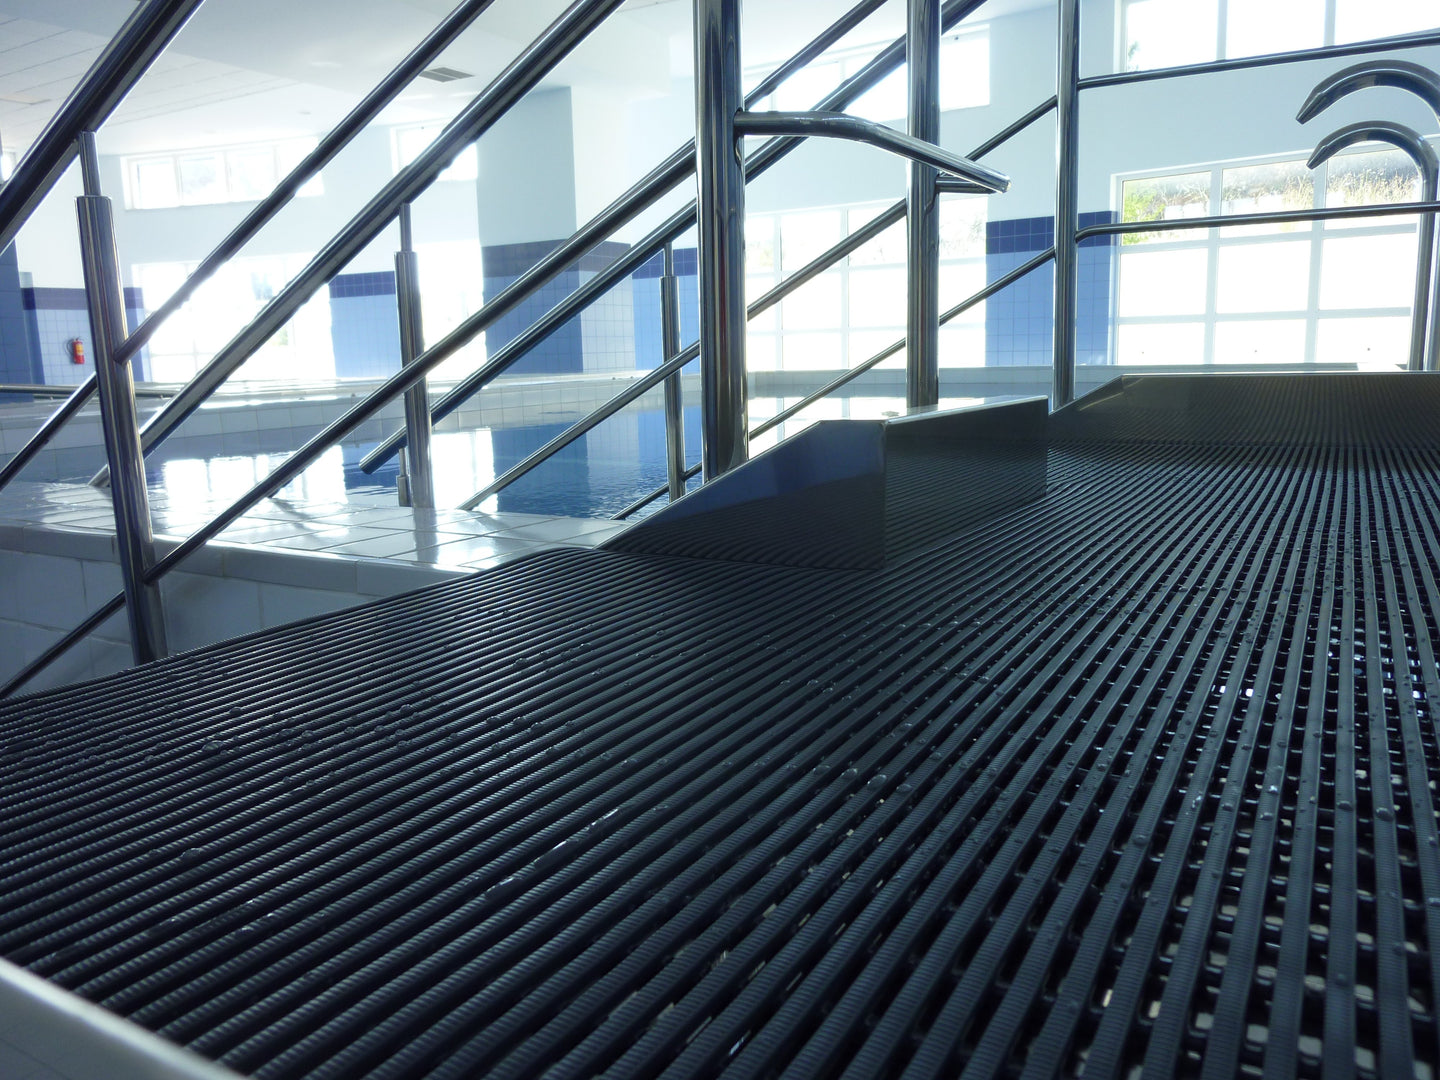 All our pool matting is slip-resistant, hygienic and comfortable underfoot, making it the ideal surface for bare feet.